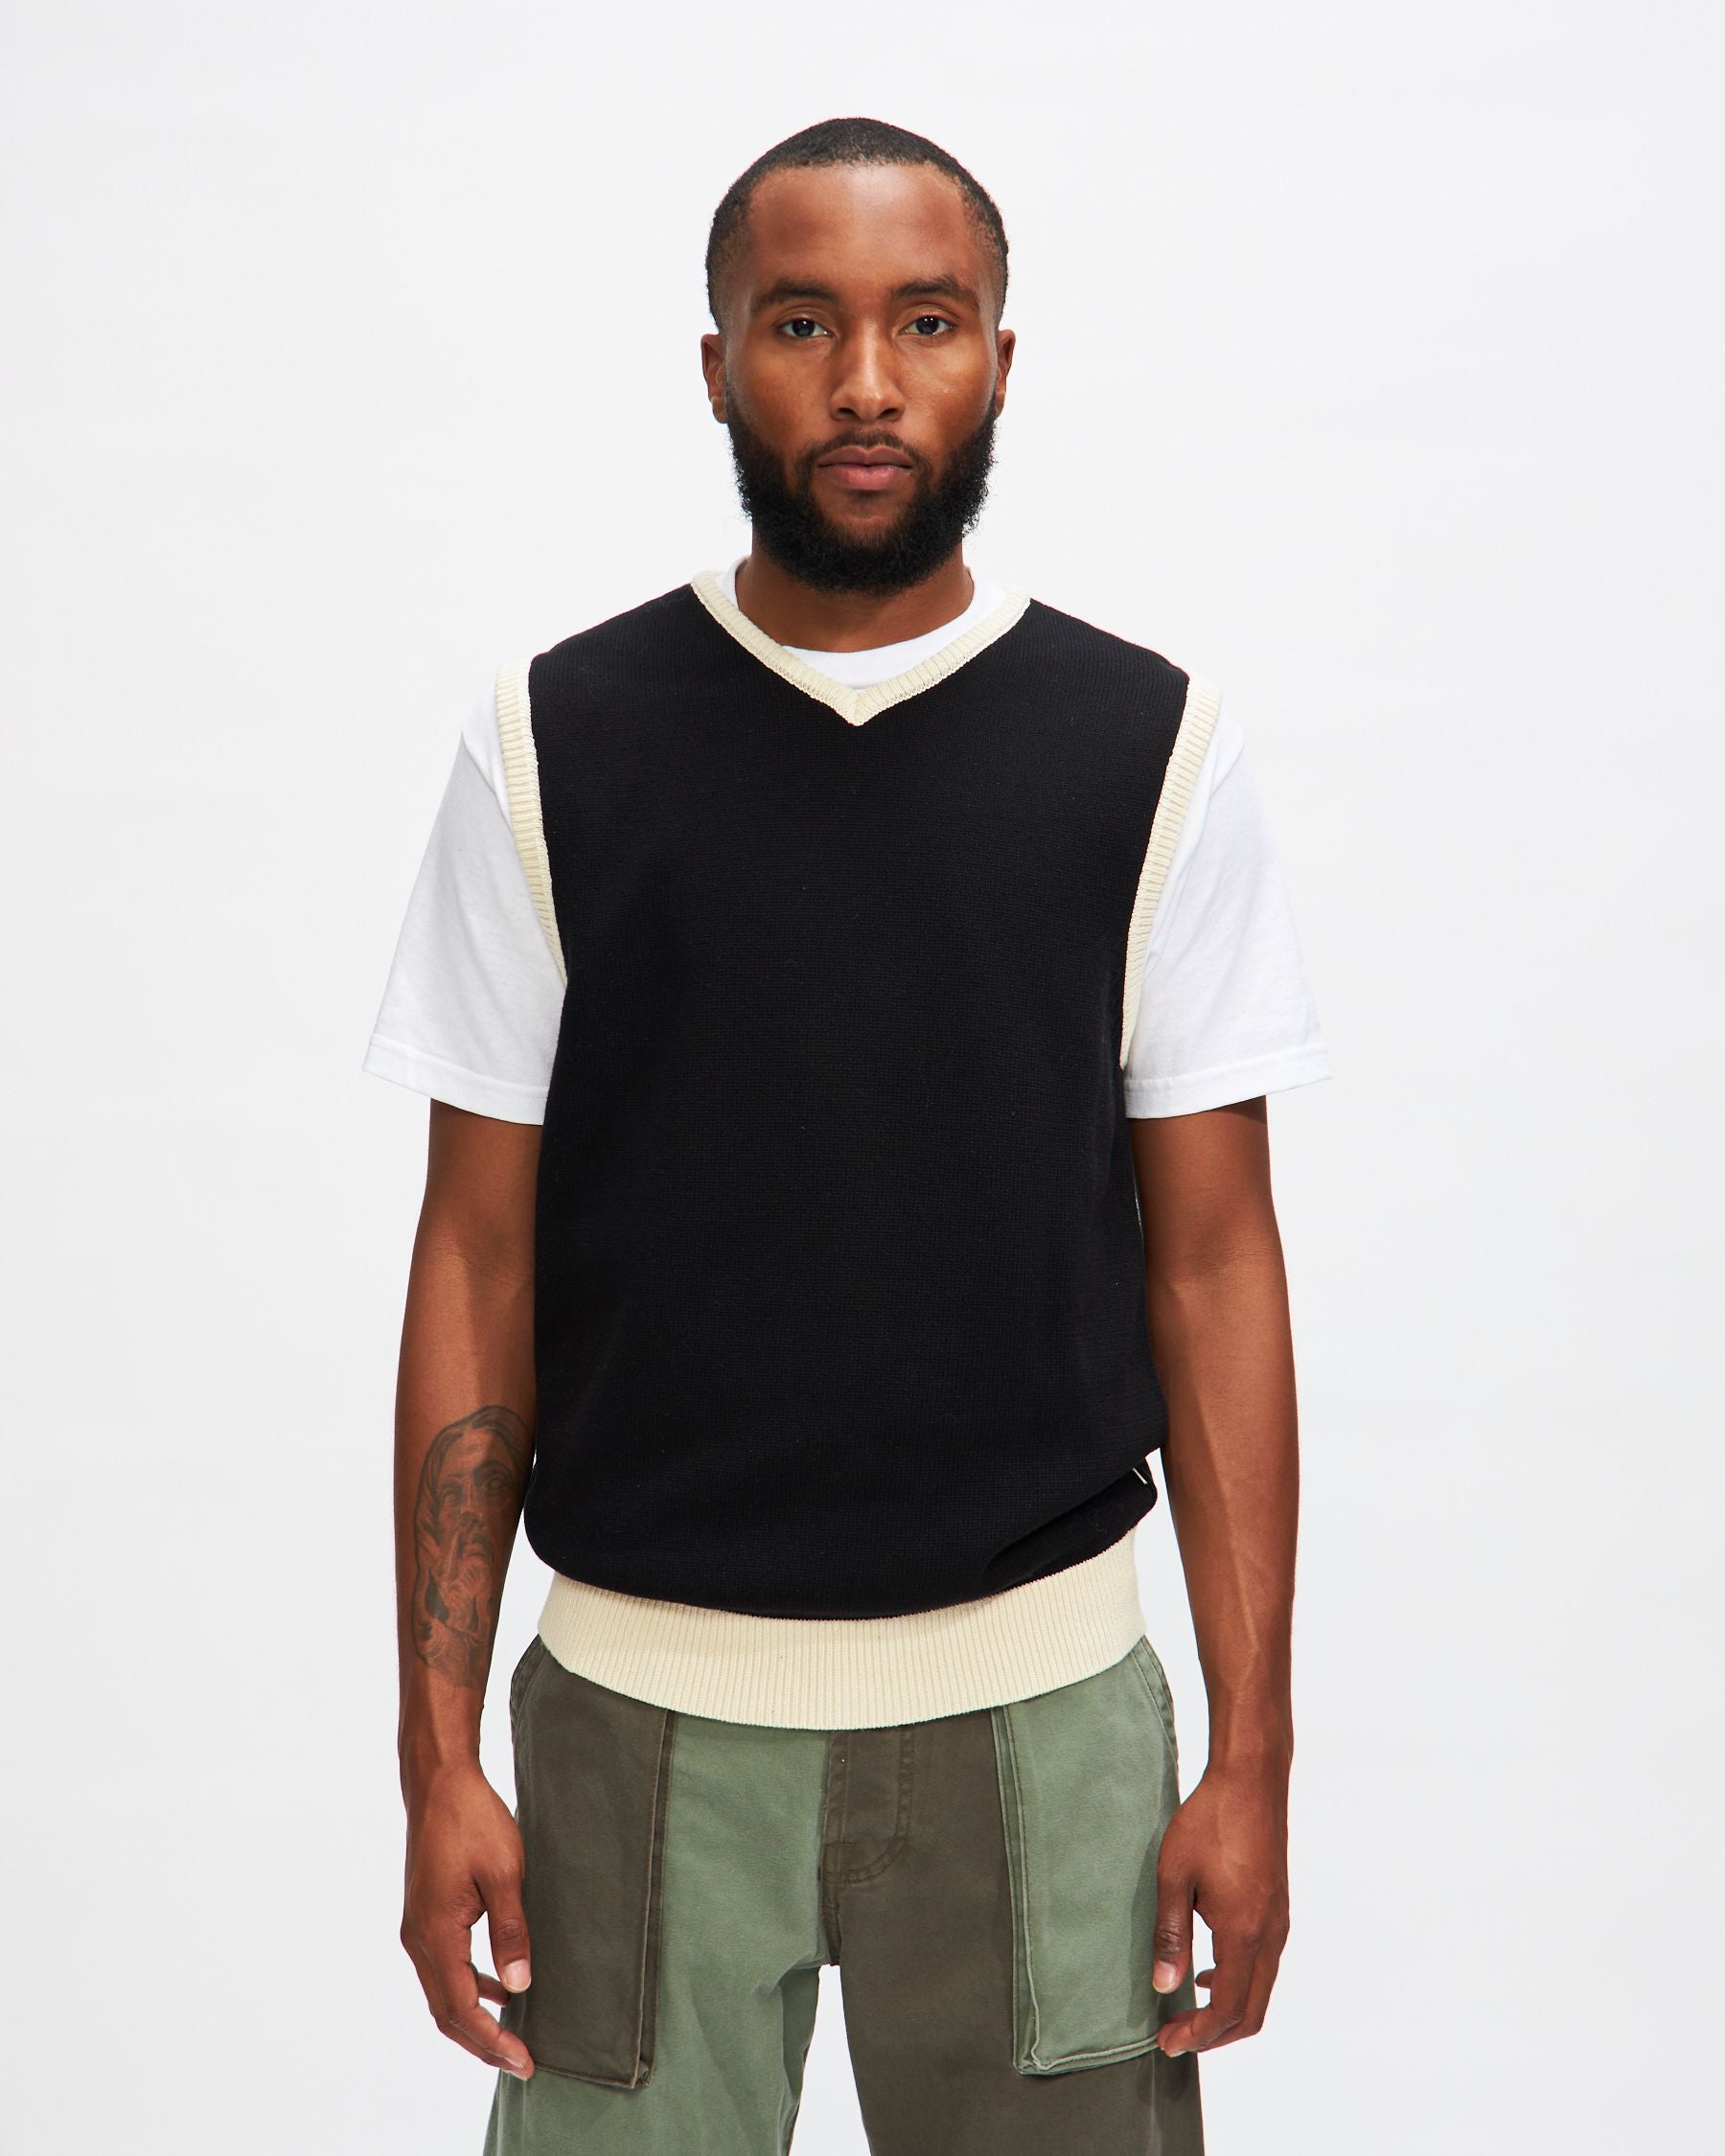 Knitted Sweater Vest in Black/ Cream